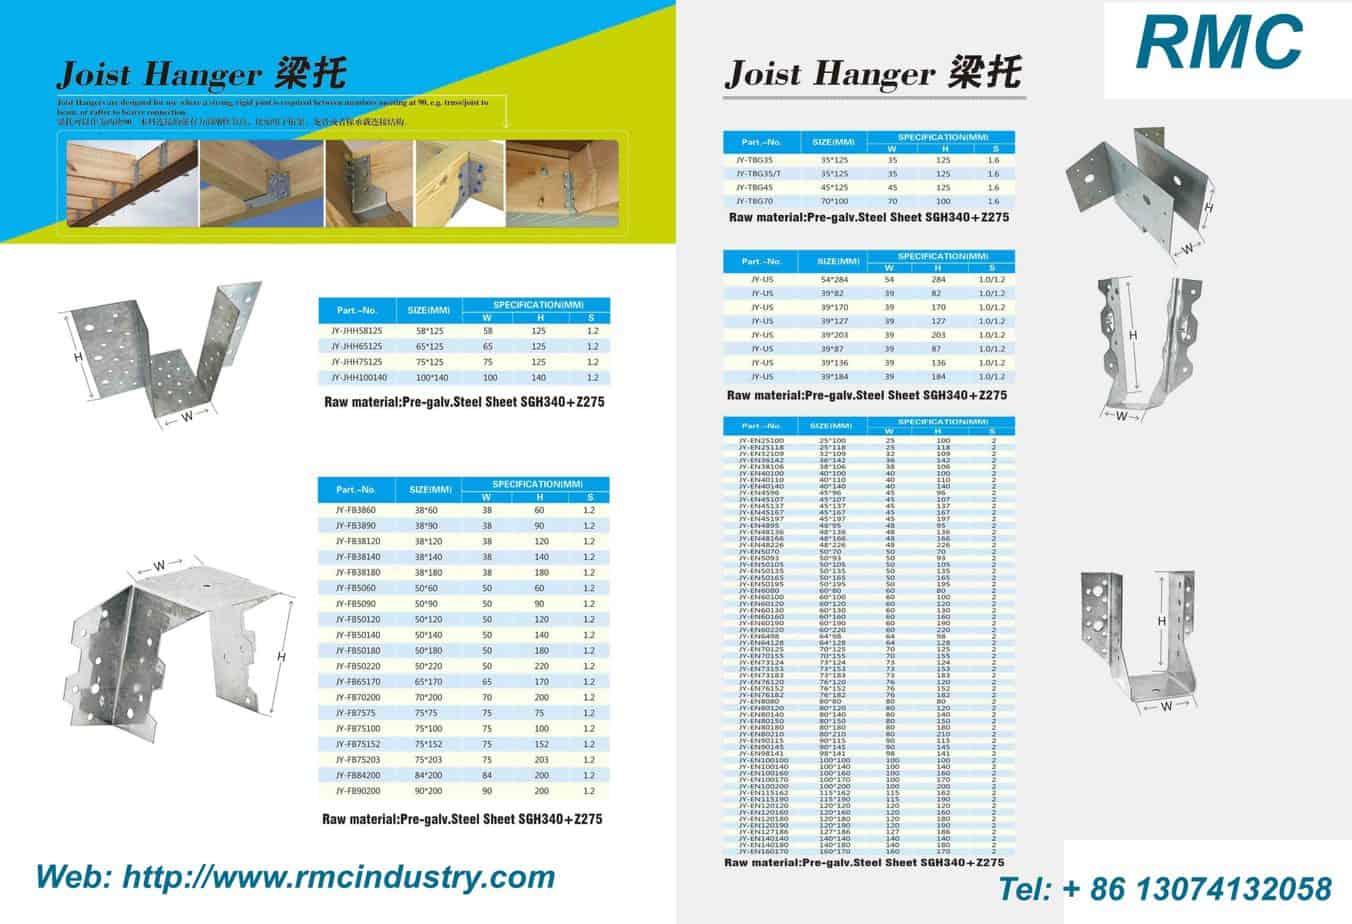  Joist Hanger size specification Chart_RMC